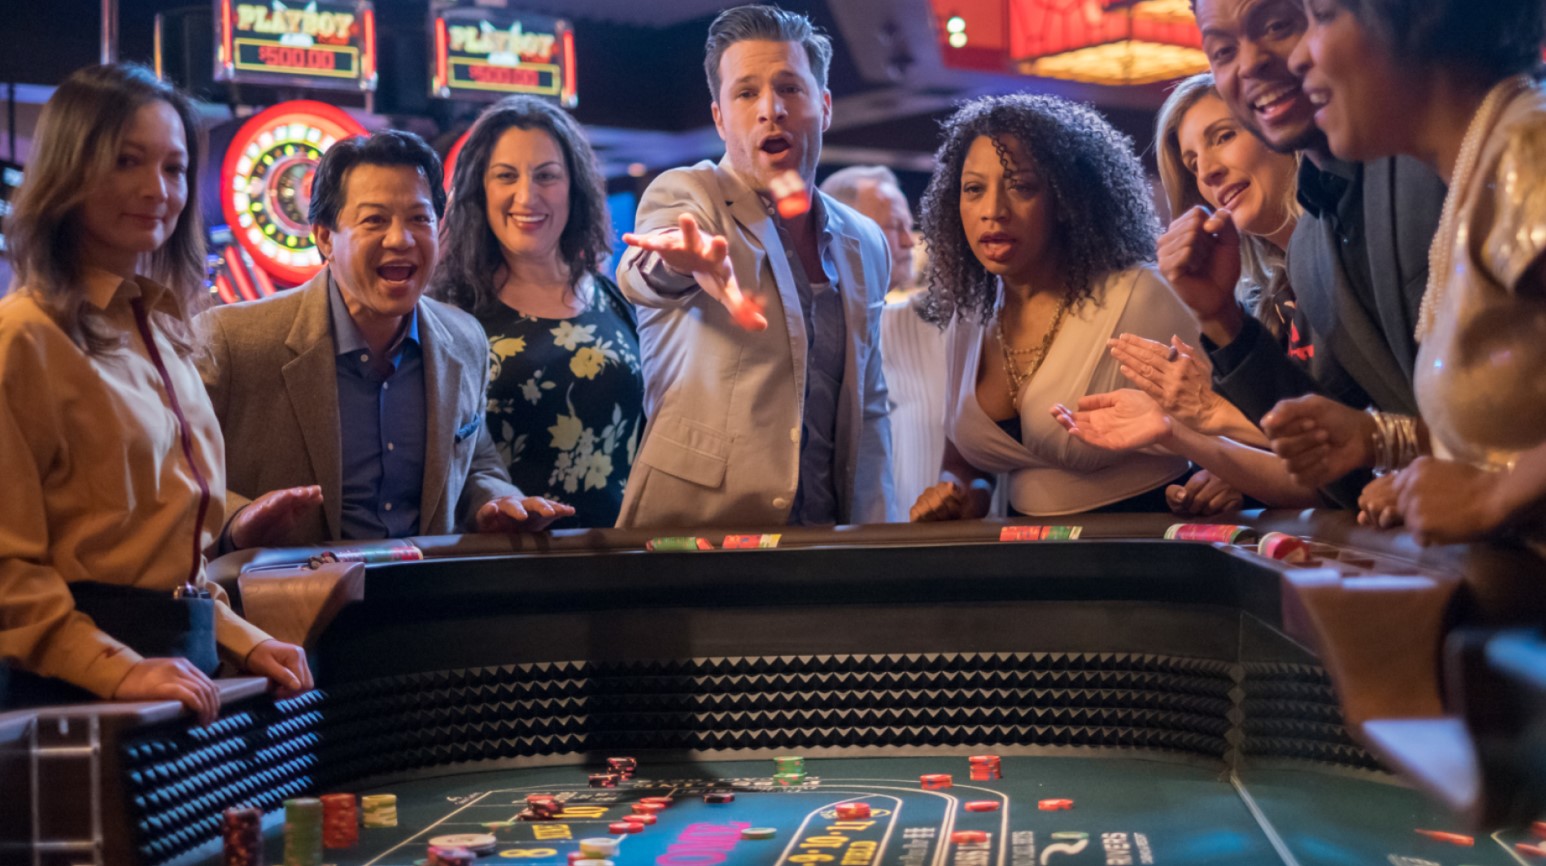 BOOM ENTERTAINMENT EXPANDS TO NJ AND PA ONLINE CASINOS